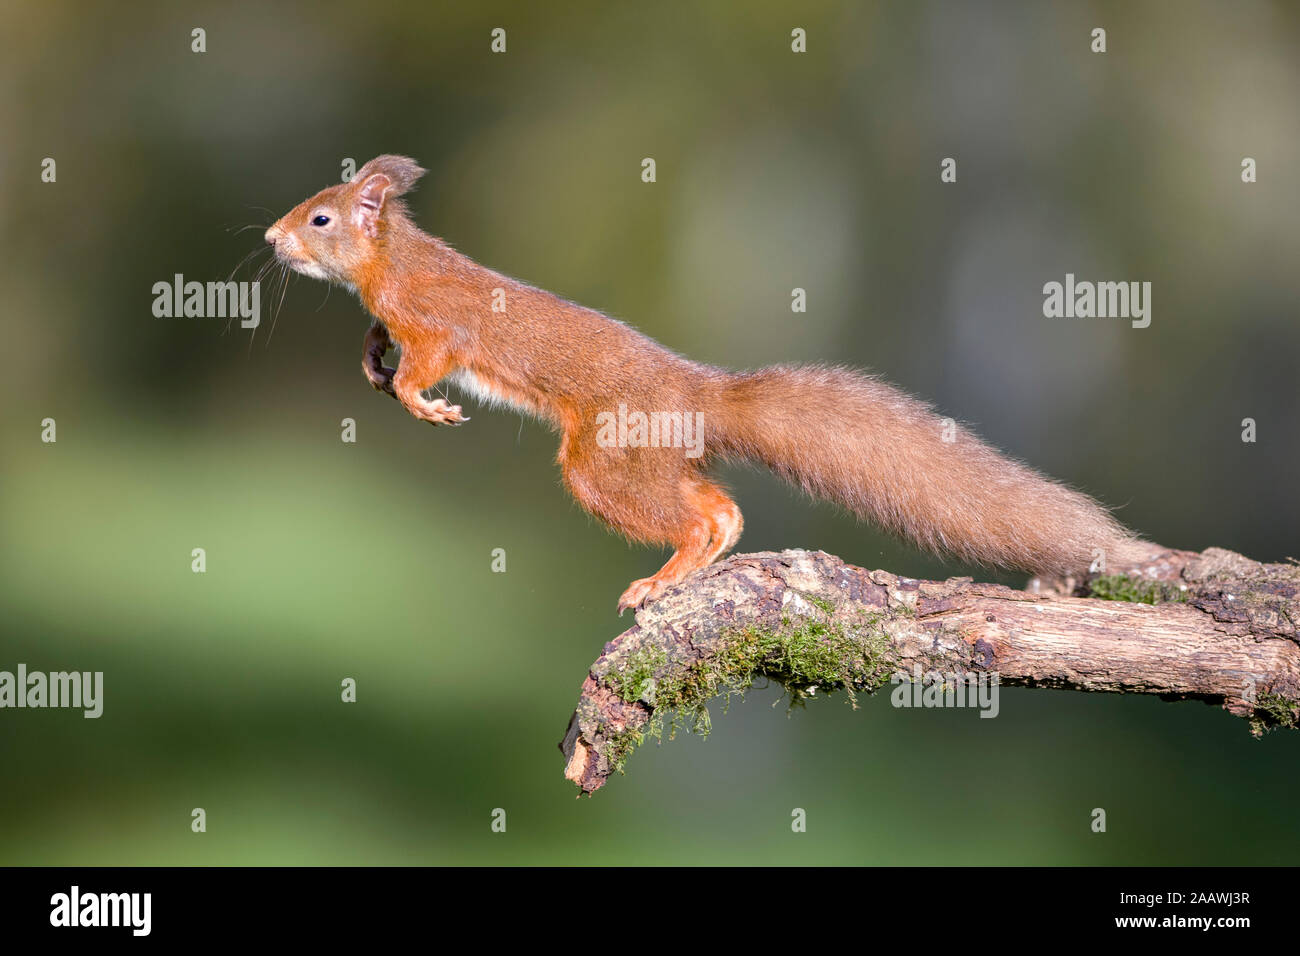 Jumping red squirrel Stock Photo